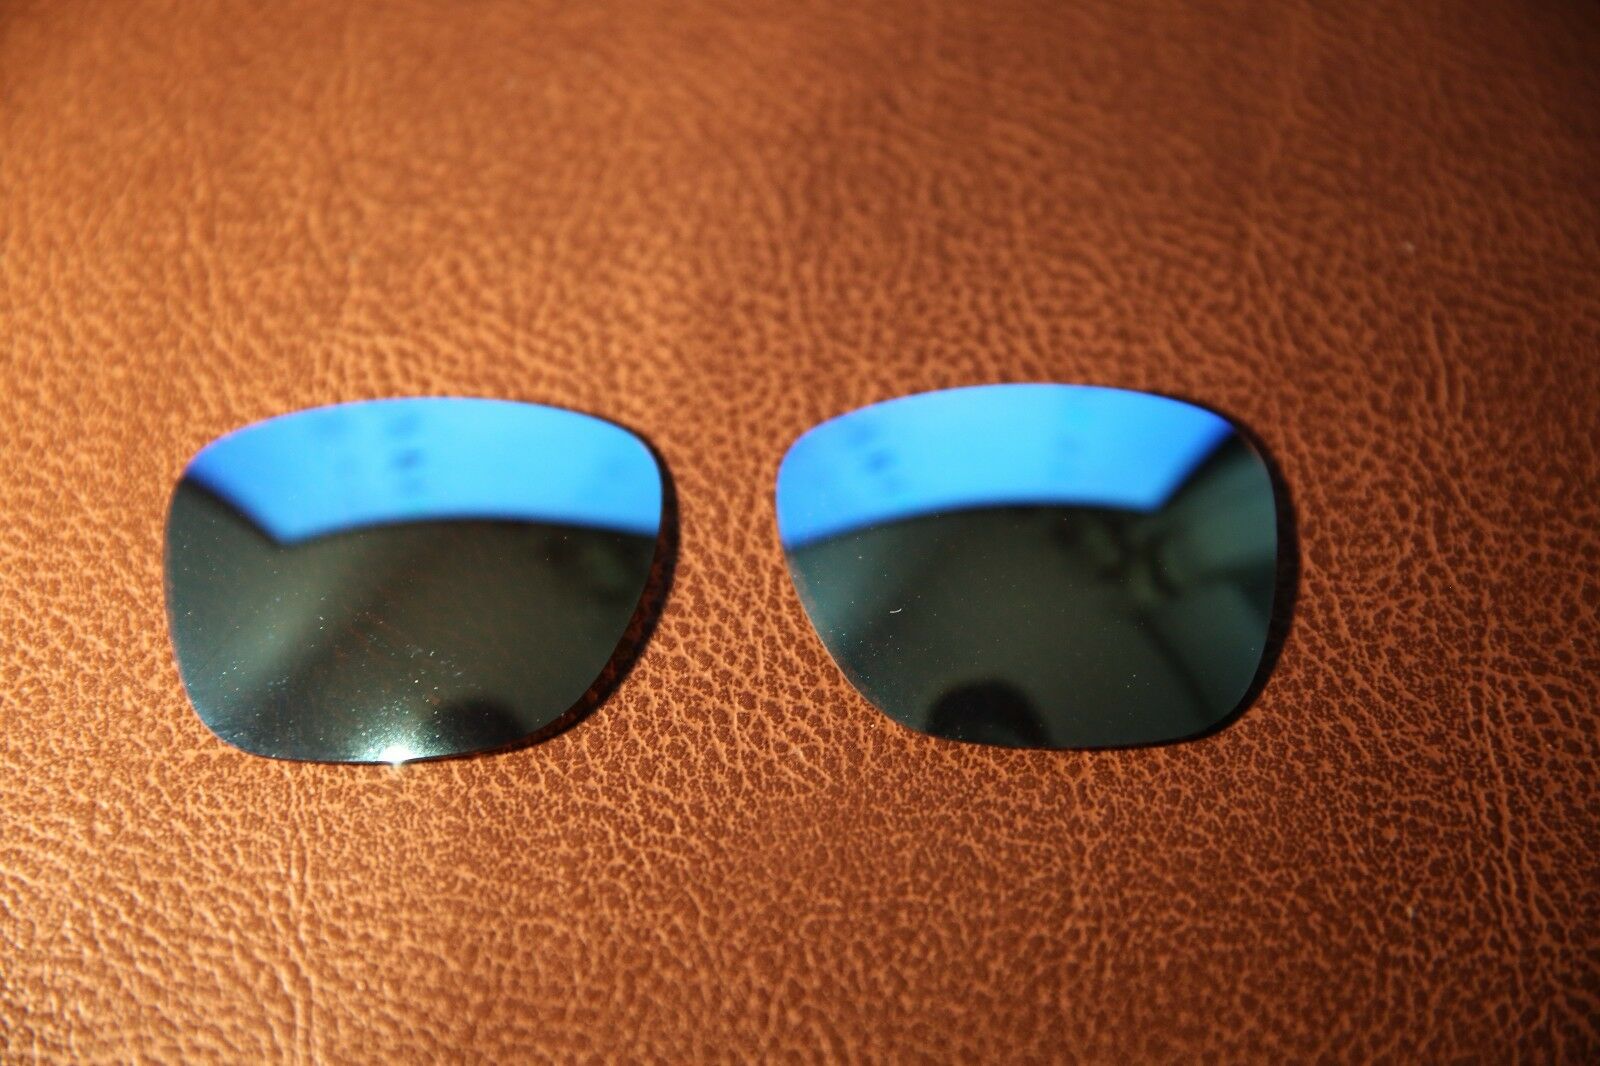 PolarLens POLARIZED Ice Blue Replacement Lens for-Oakley Catalyst Sunglasses